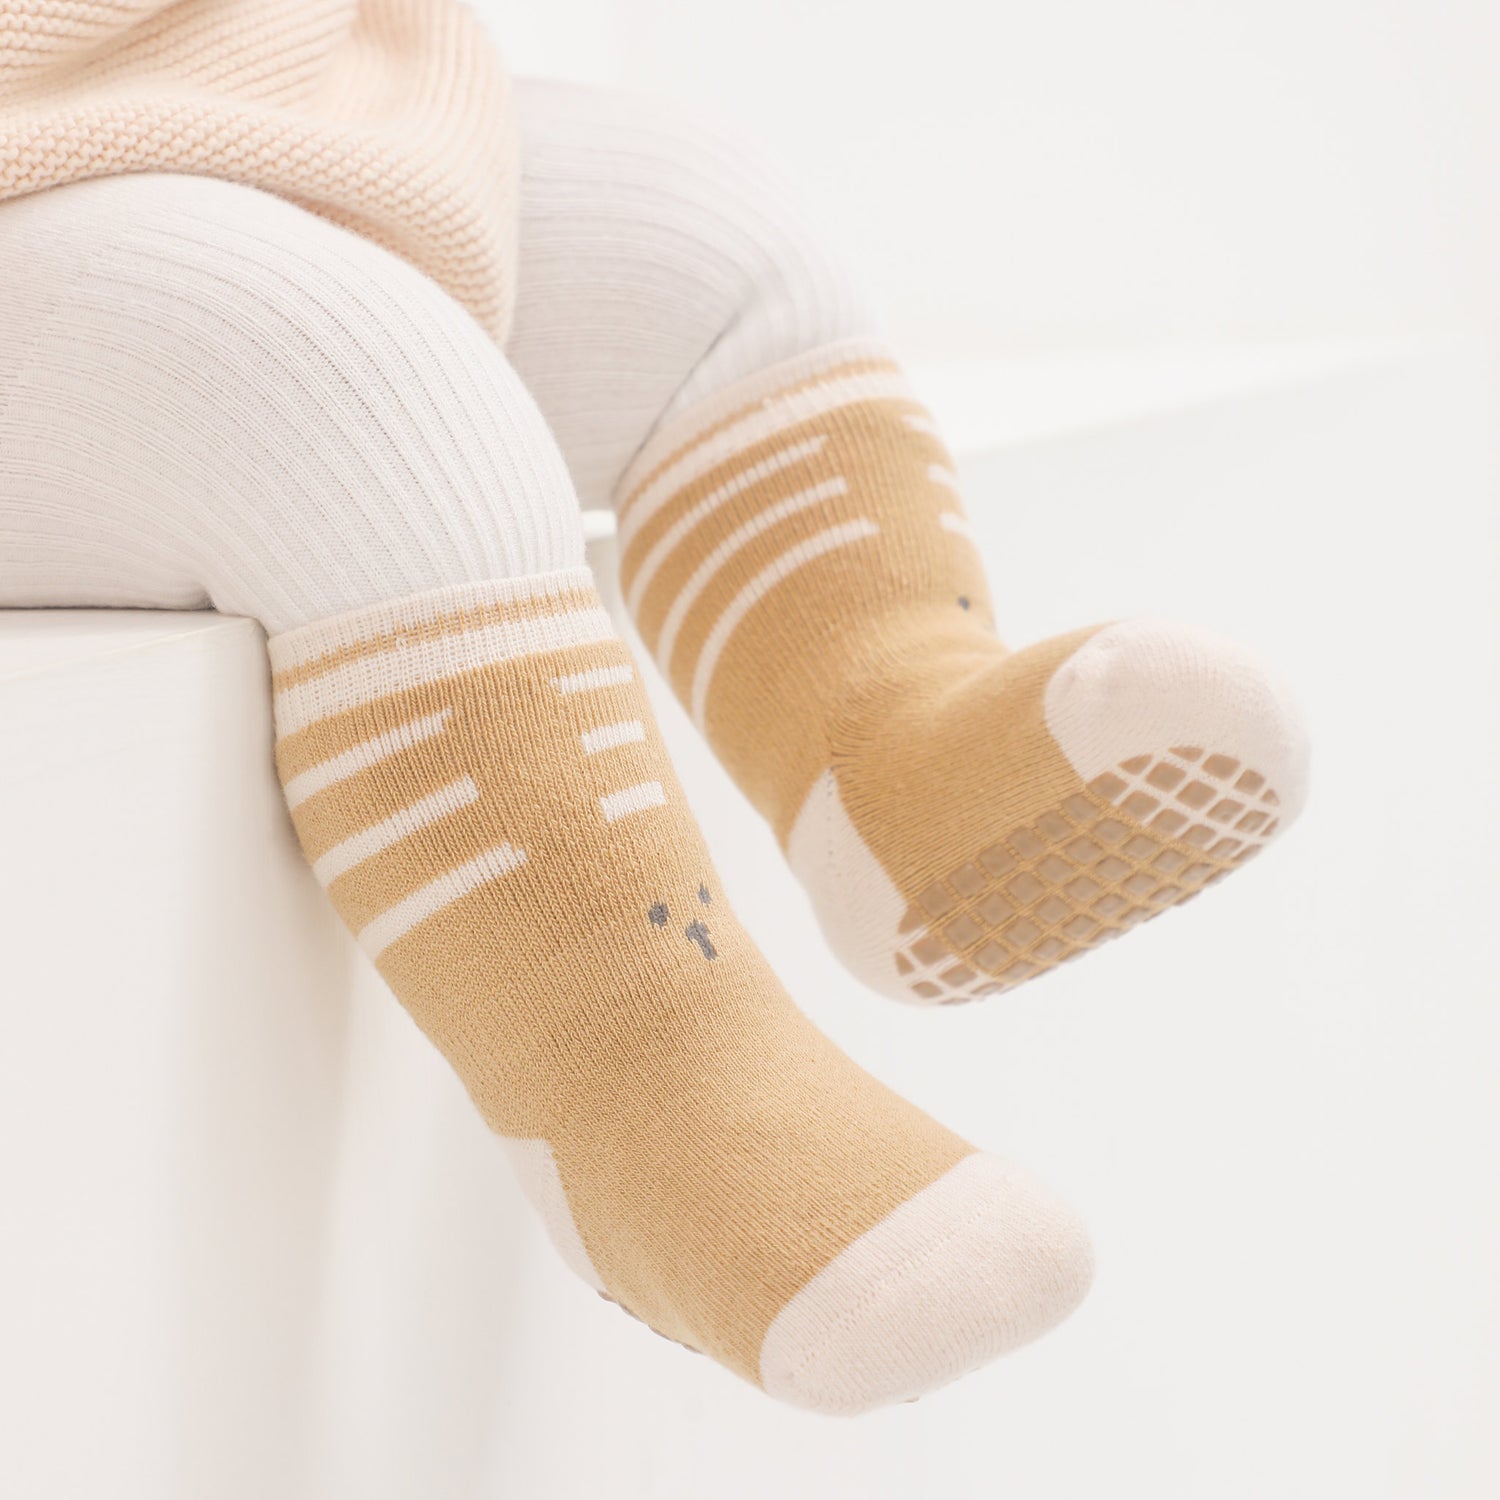 Baby socks with reinforced stay-on loops for easy dressing